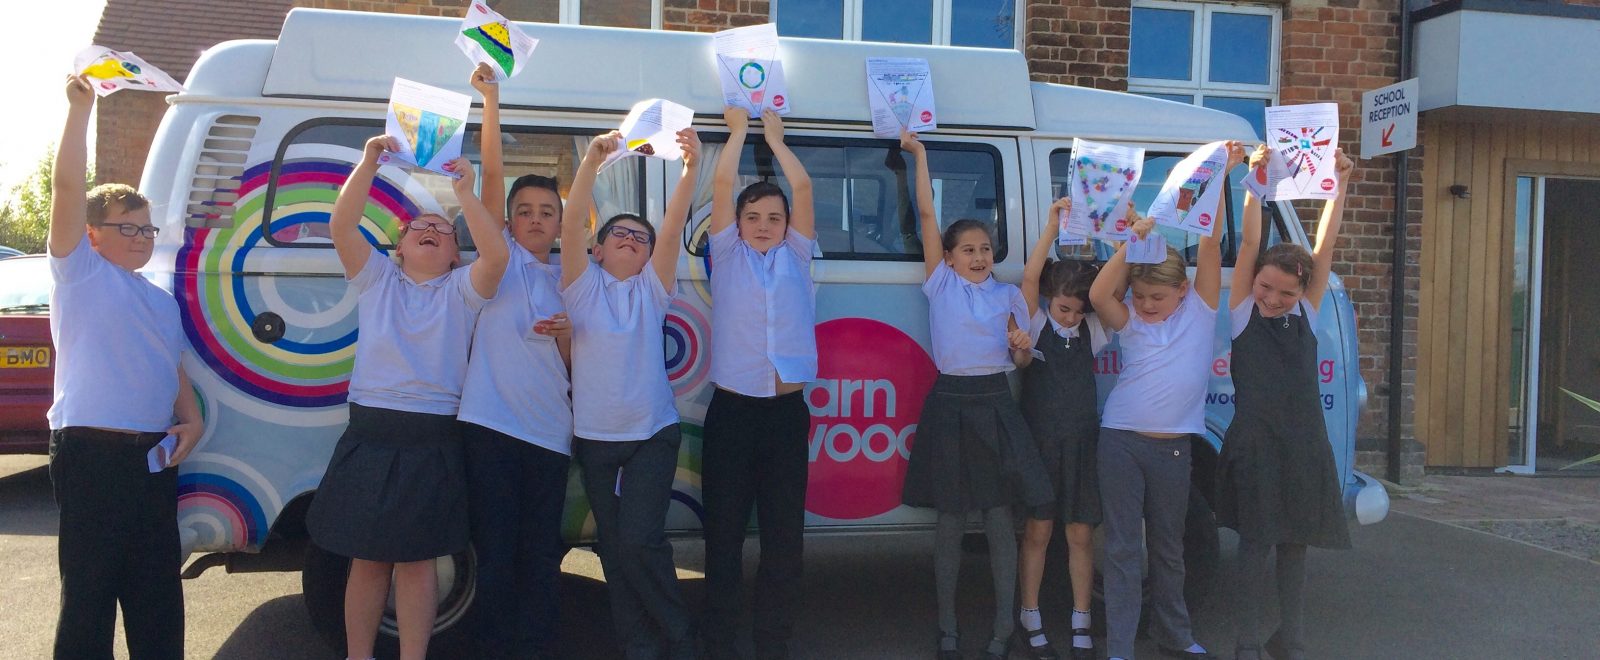 Children holding their drawings in front of the tour camper van.